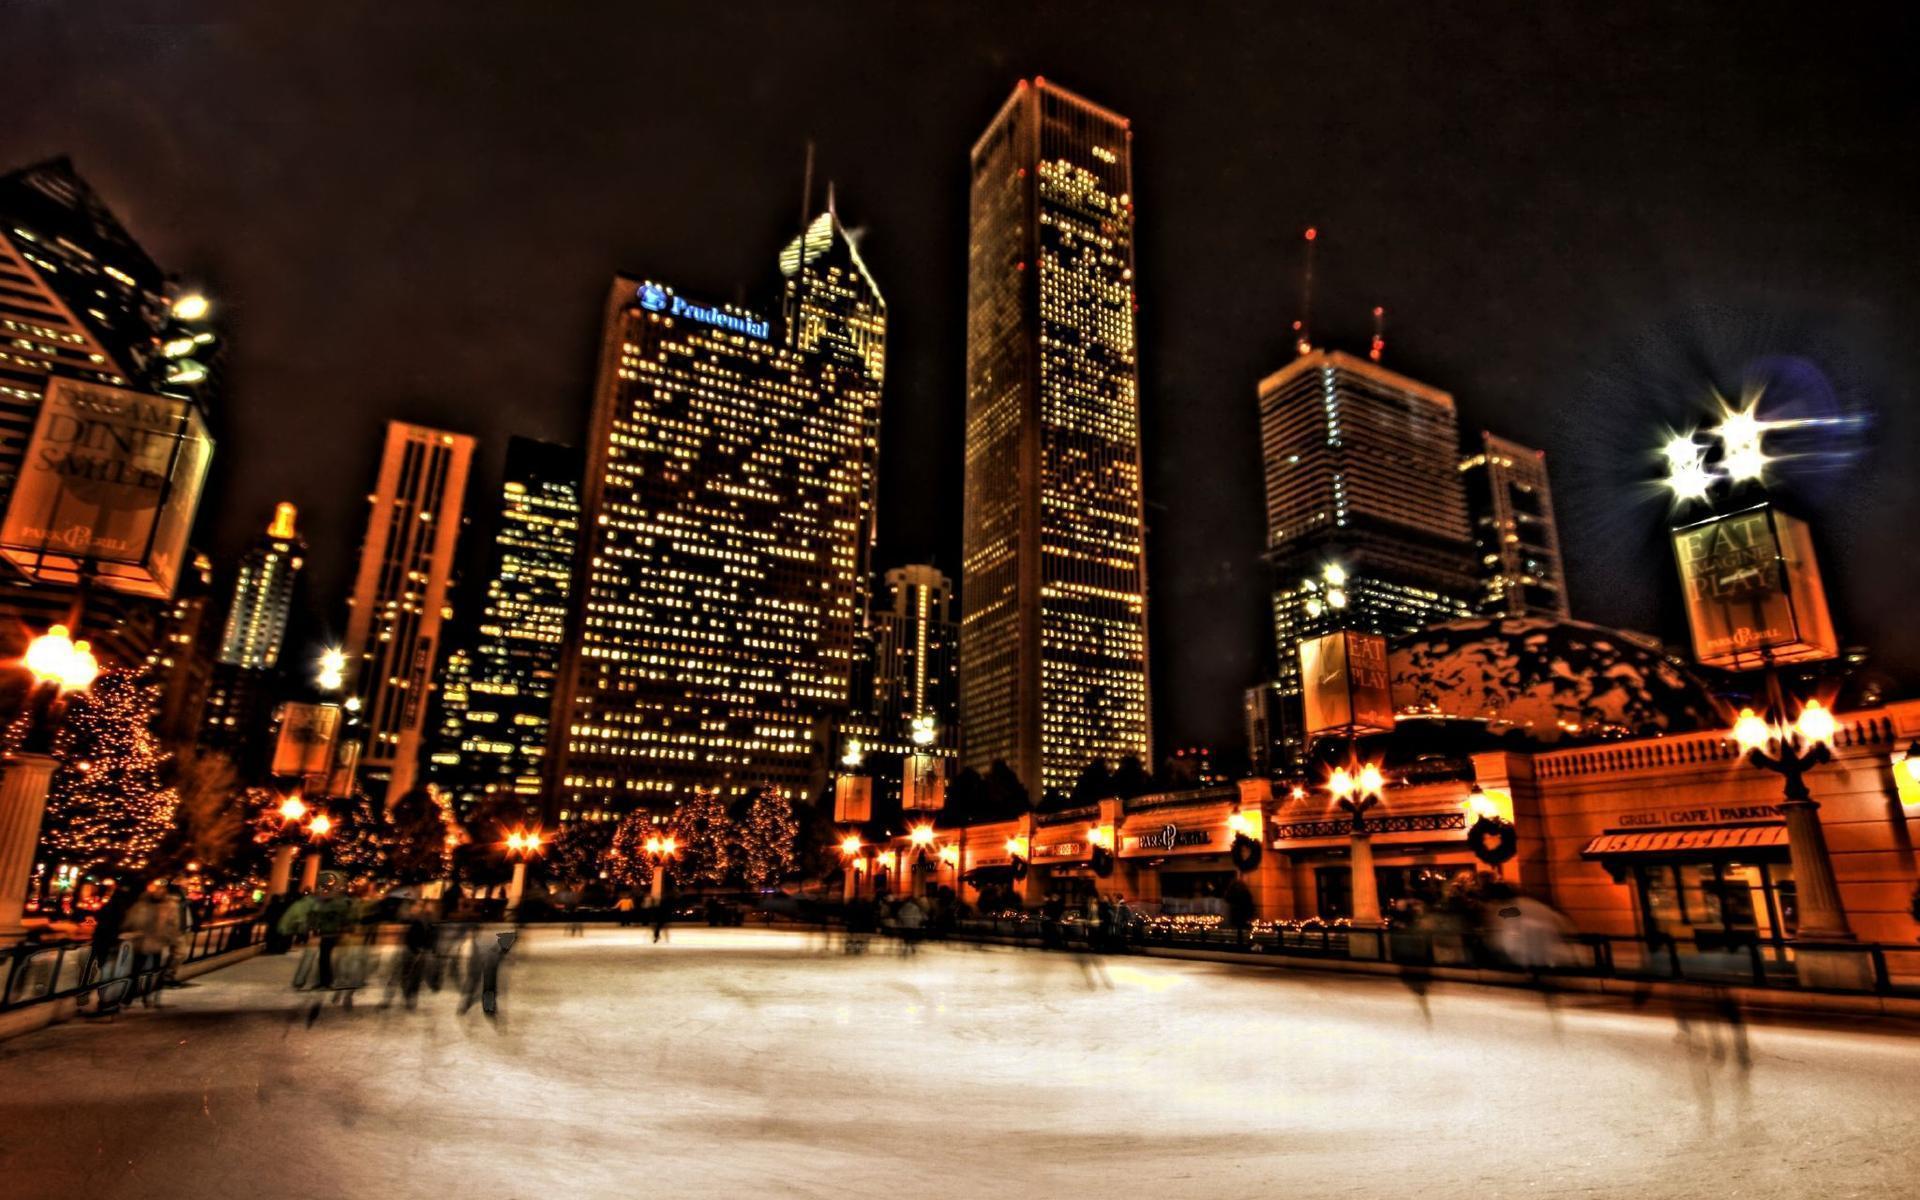 Free Wallpaper of Ice Skating in Chicago